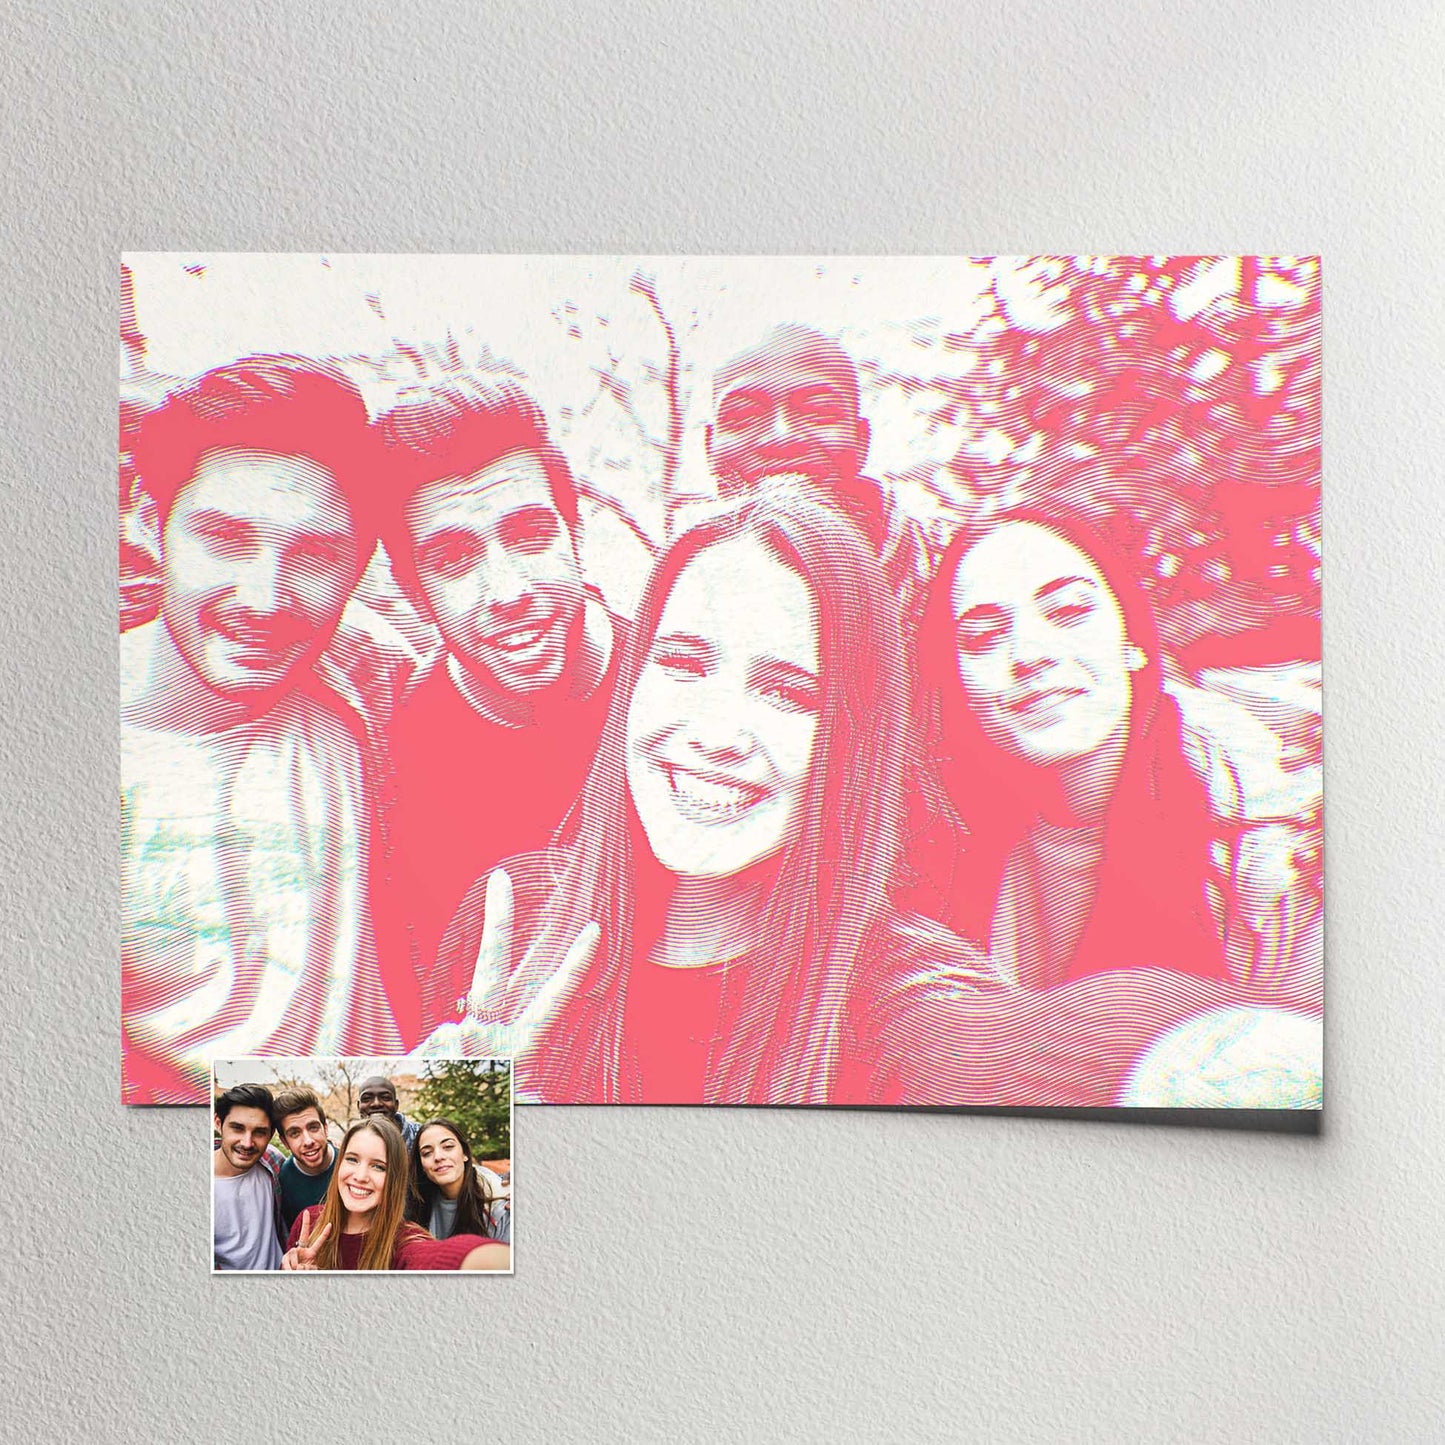 Capture cherished memories with our Personalised Pink Engraving Print from photo. With its trendy engraving filter, the pink hues transform your images into modern and vibrant works of art. This ultra cool and fresh design